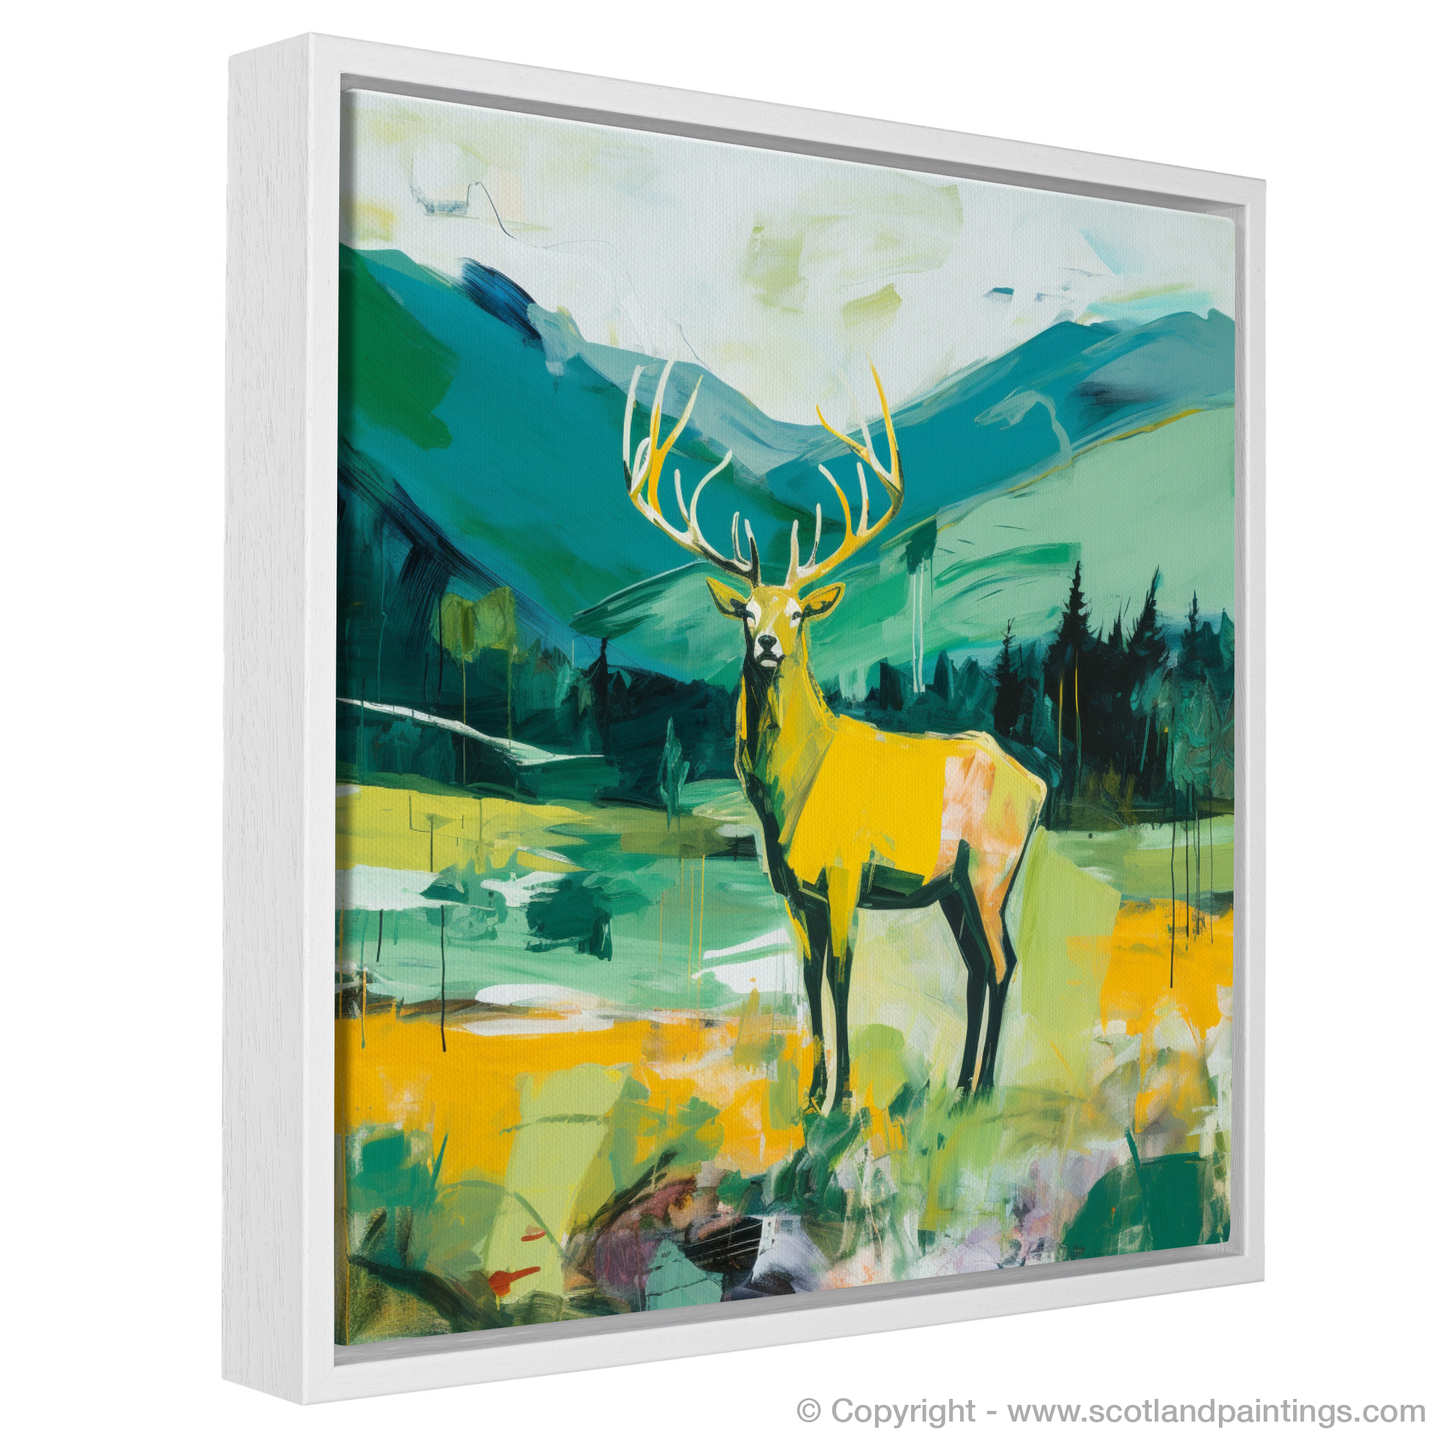 Painting and Art Print of A stag in Glencoe during summer. Majestic Stag of Glencoe: A Modern Scottish Summer Symphony.